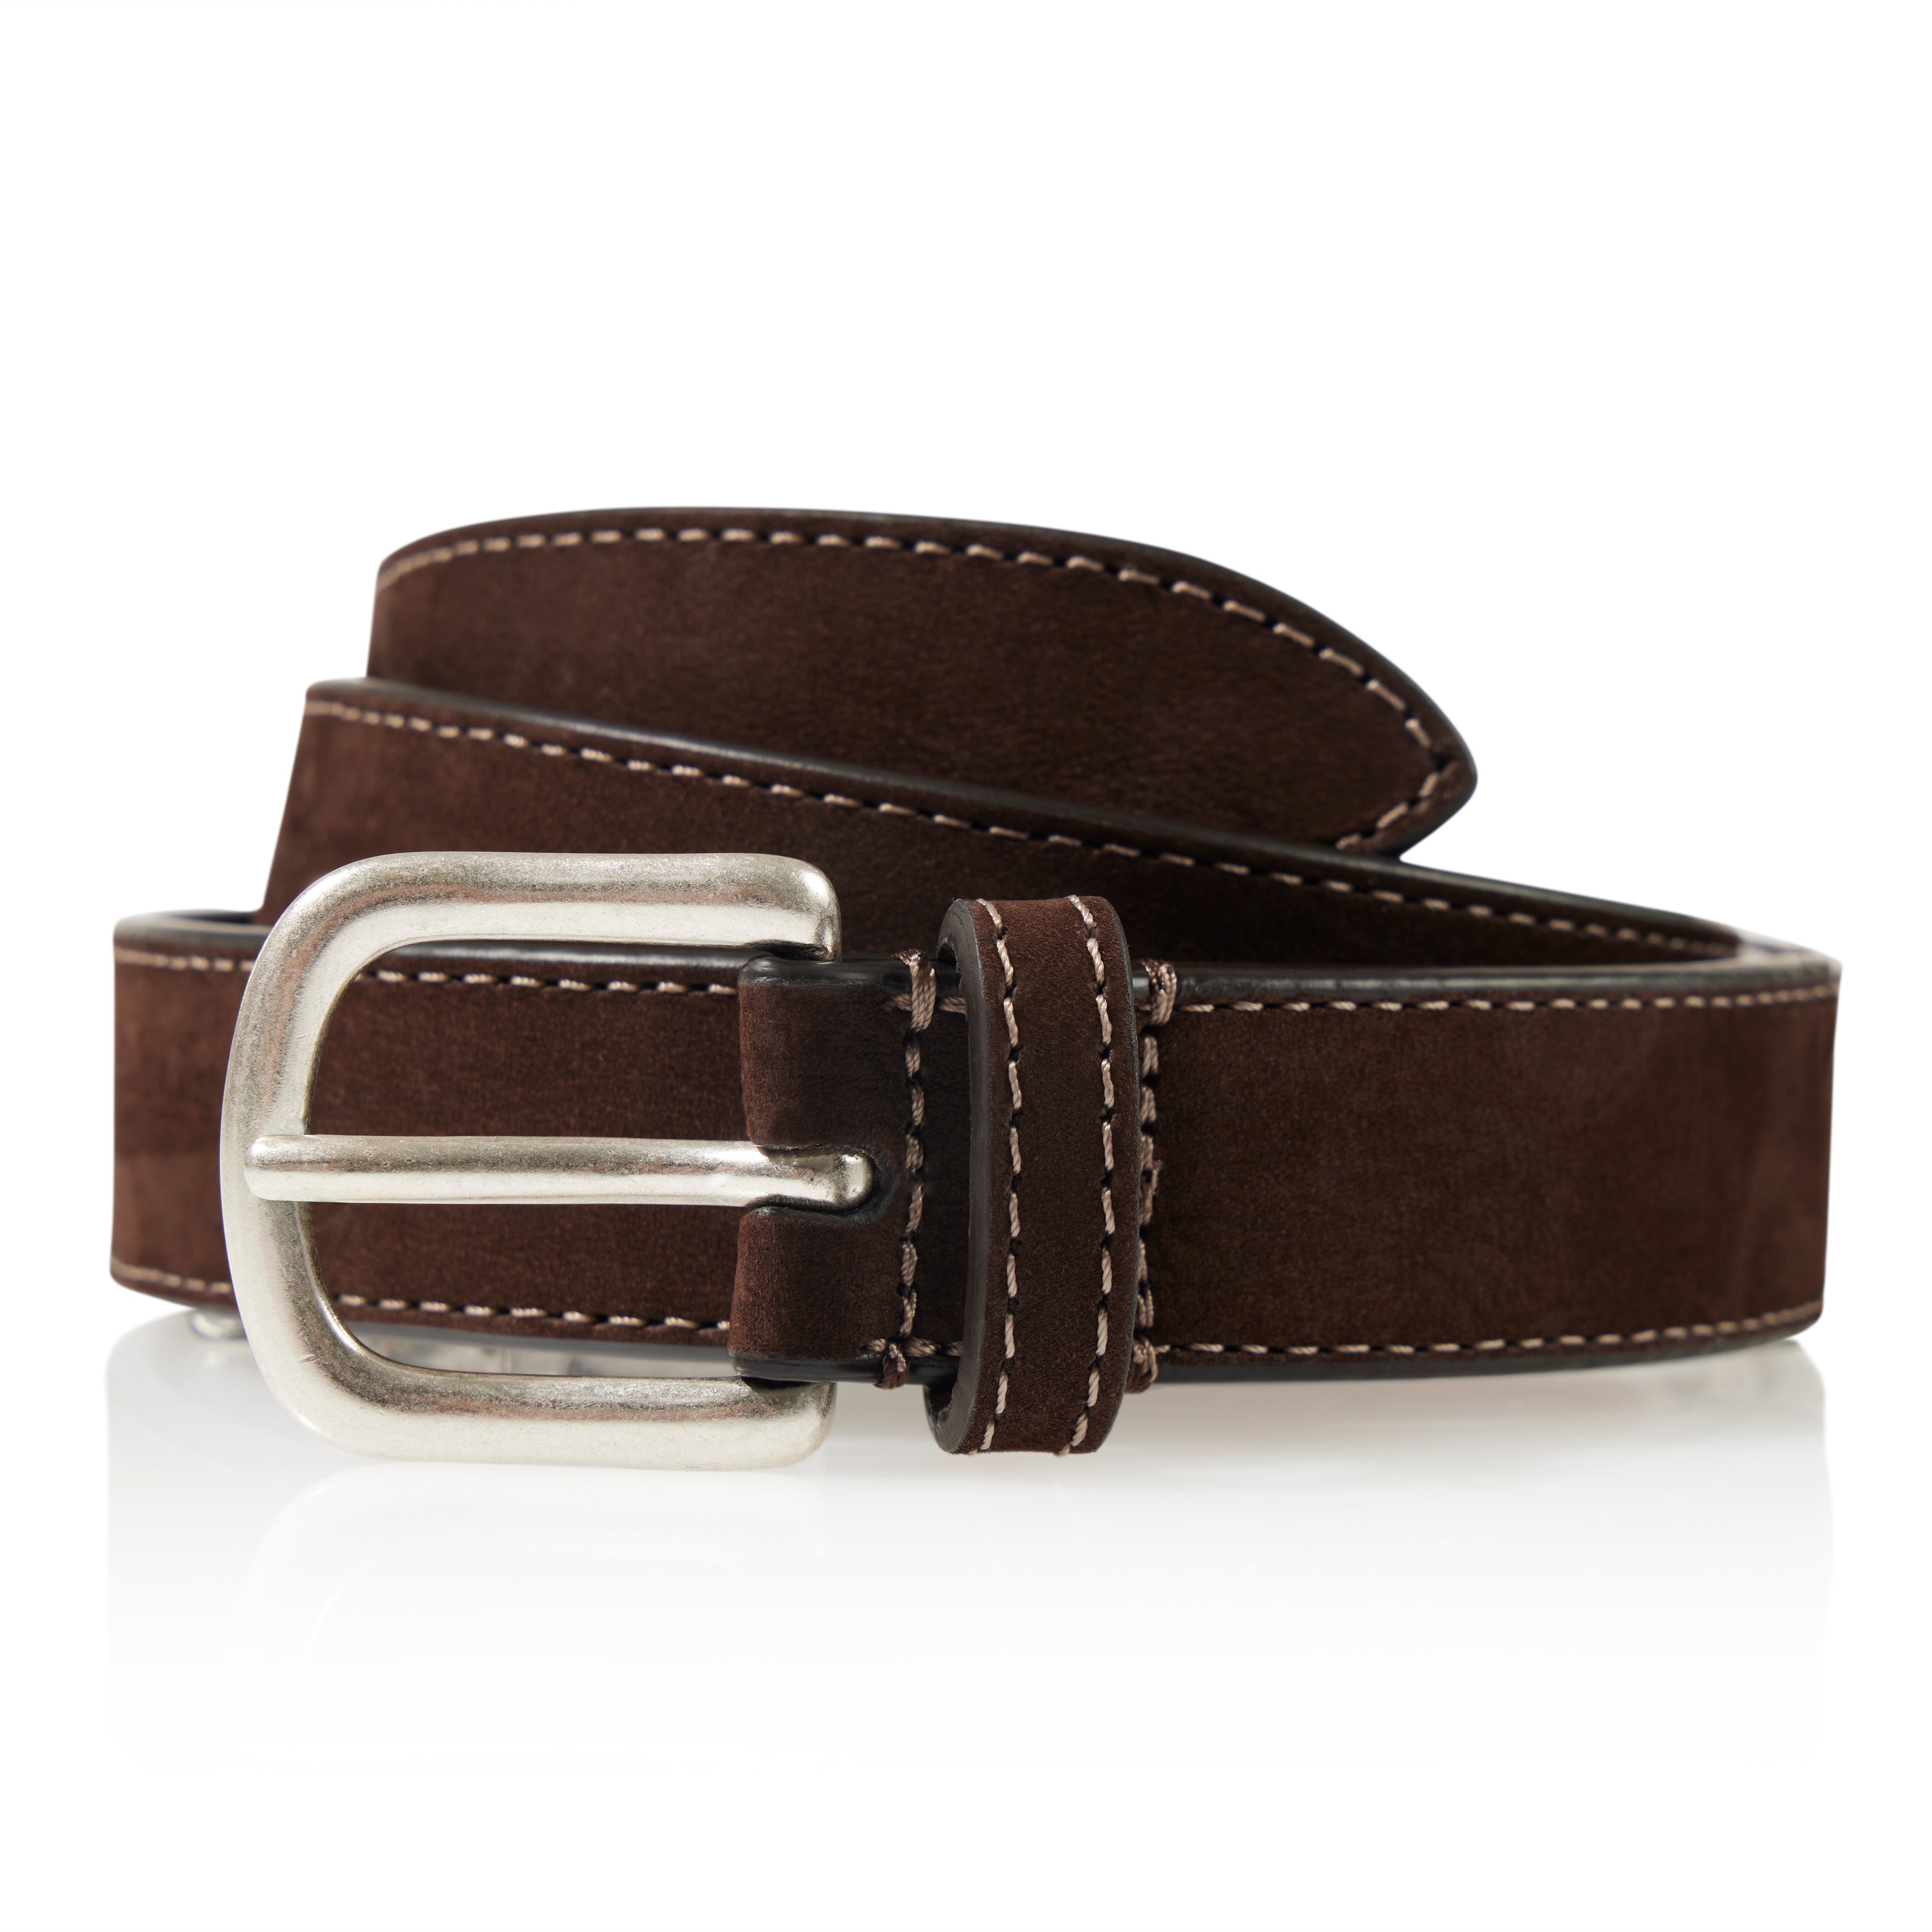 Belts - The Armoury